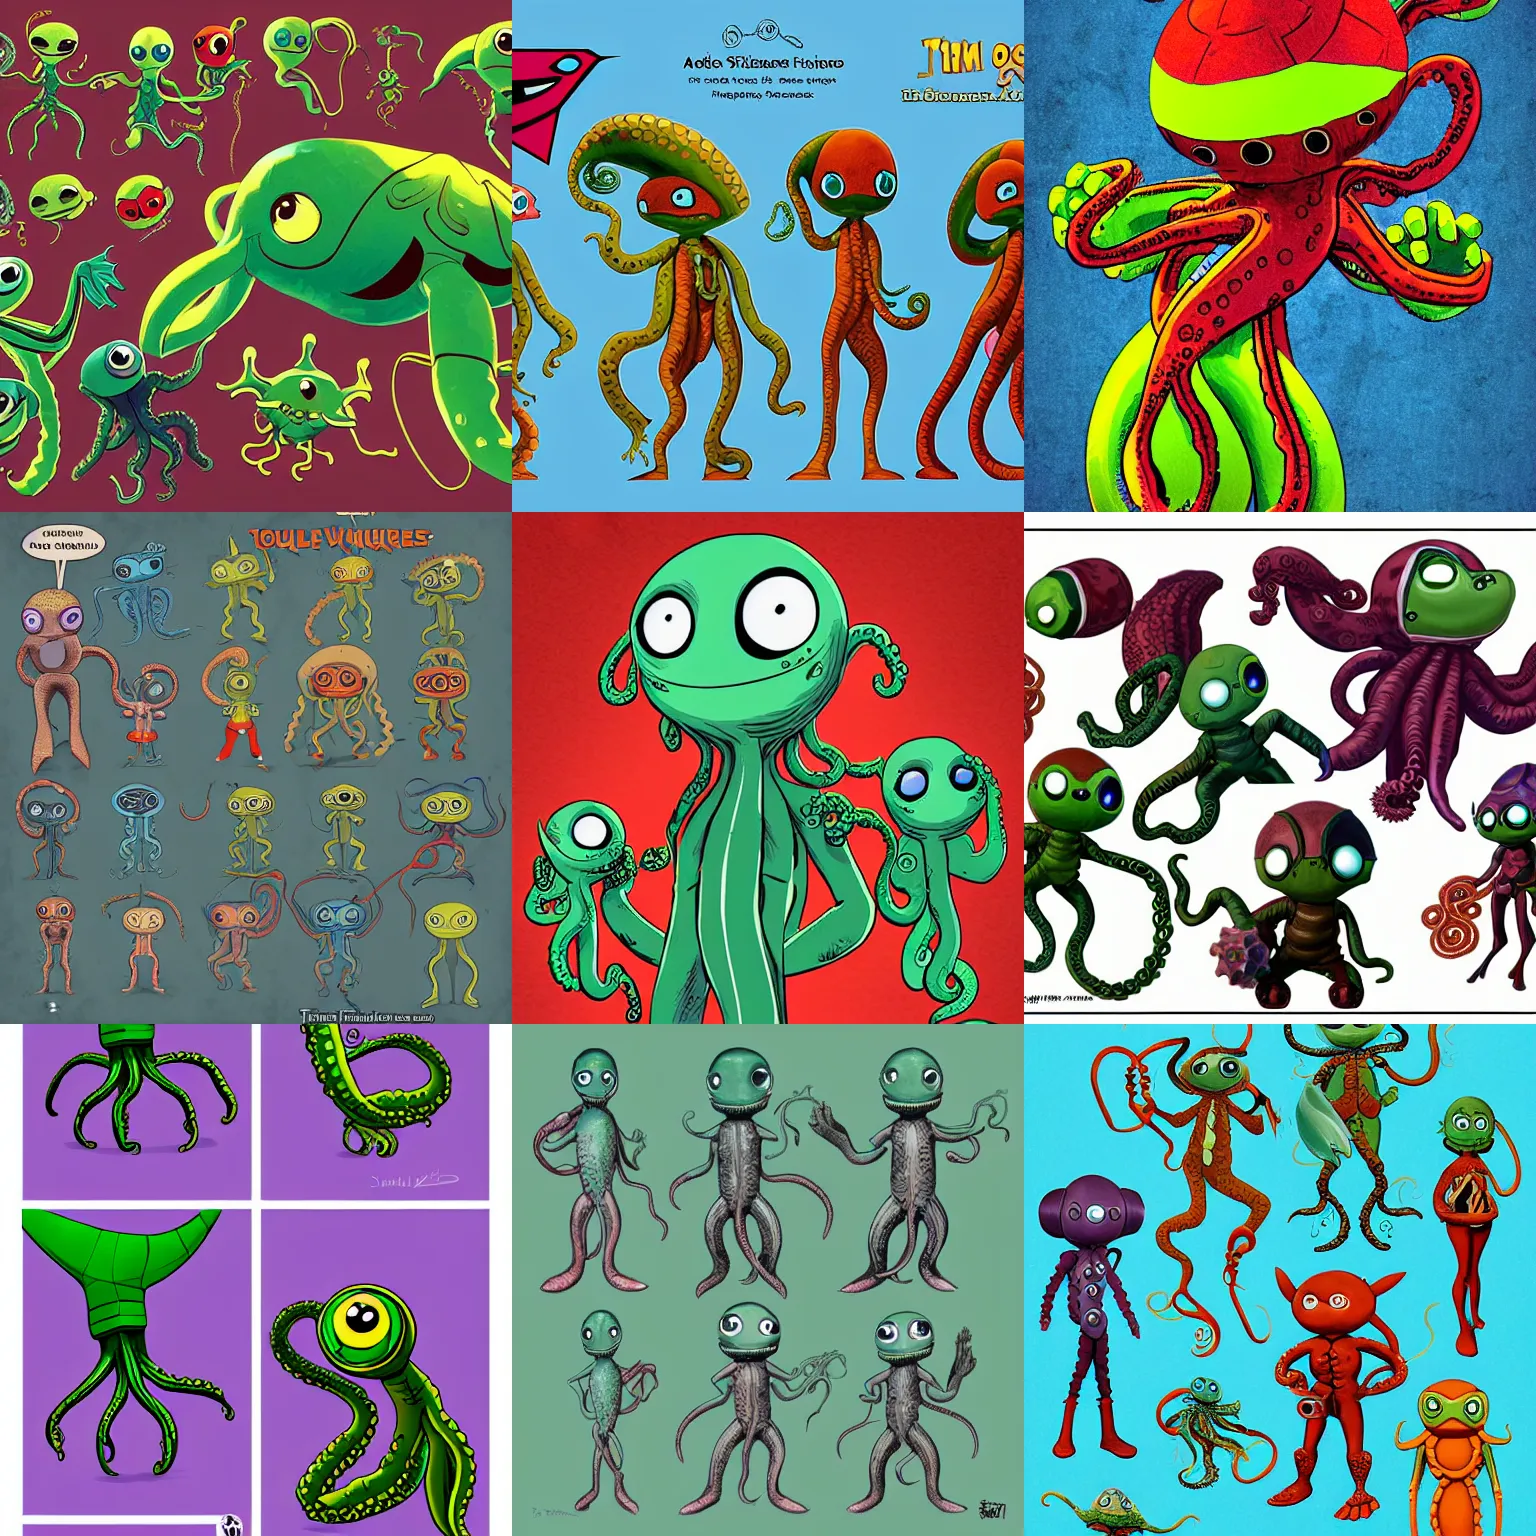 Prompt: vintage friend shaped little alien race with webbed tentacle arms as playable characters design sheets for the newest psychonauts video game made by double fine done by tim shafer that focuses on an ocean setting with help from the artists of odd world inhabitants inc and Lauren faust from her work on dc superhero girls and lead artist Andy Suriano from rise of the teenage mutant ninja turtles on nickelodeon using artistic cues for the game fret nice